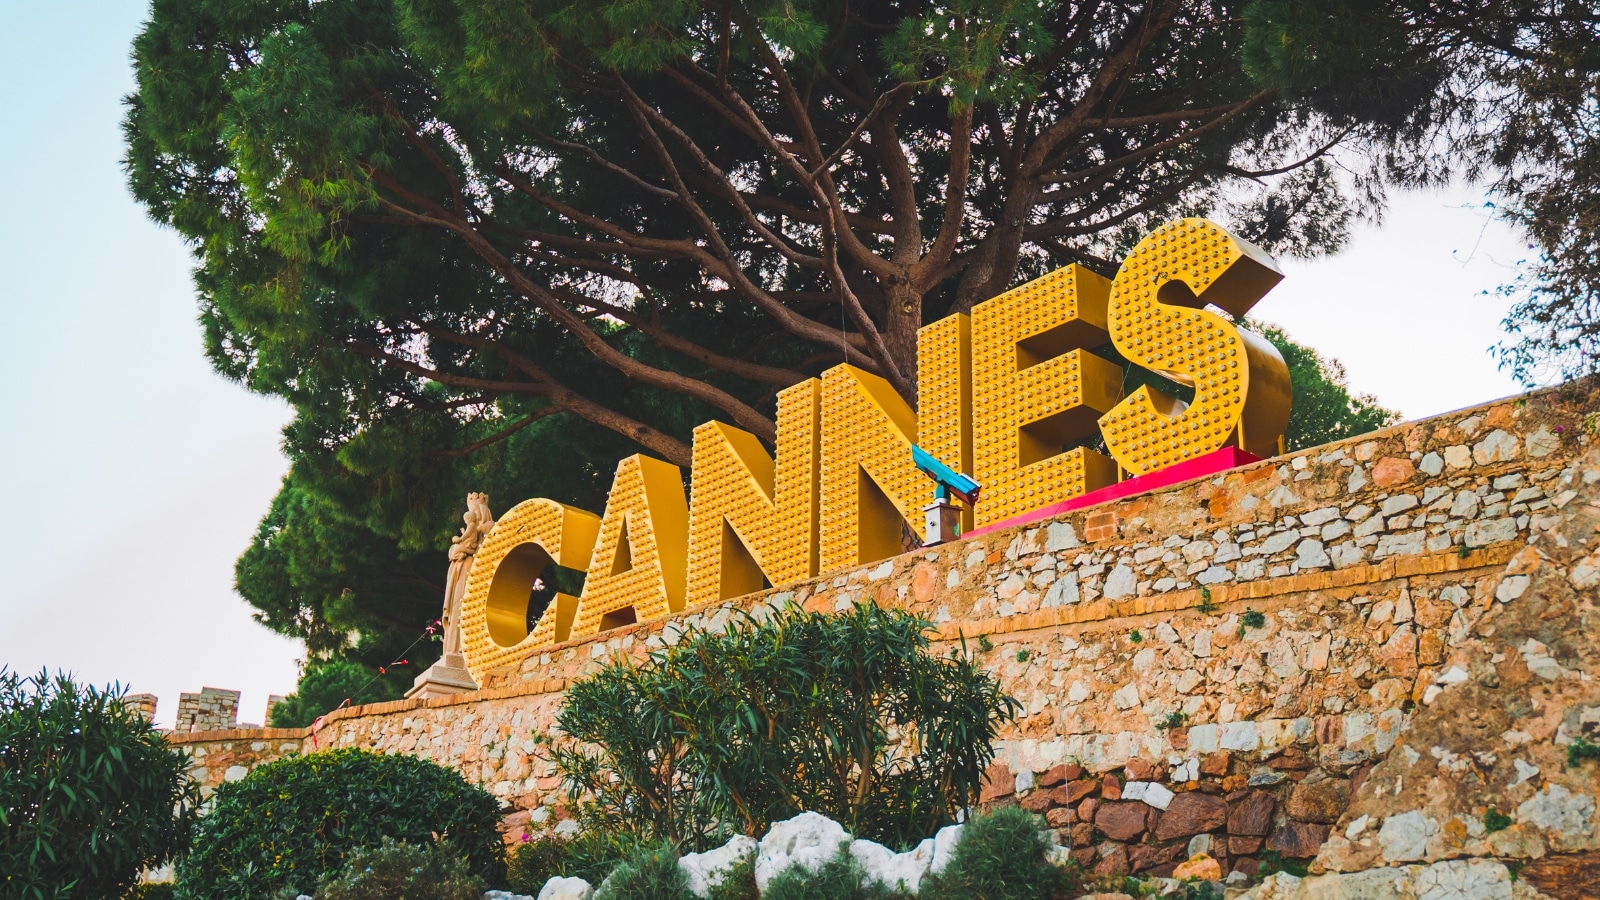 The Cannes hilltop sign with a statue to the left of it in Cannes France.